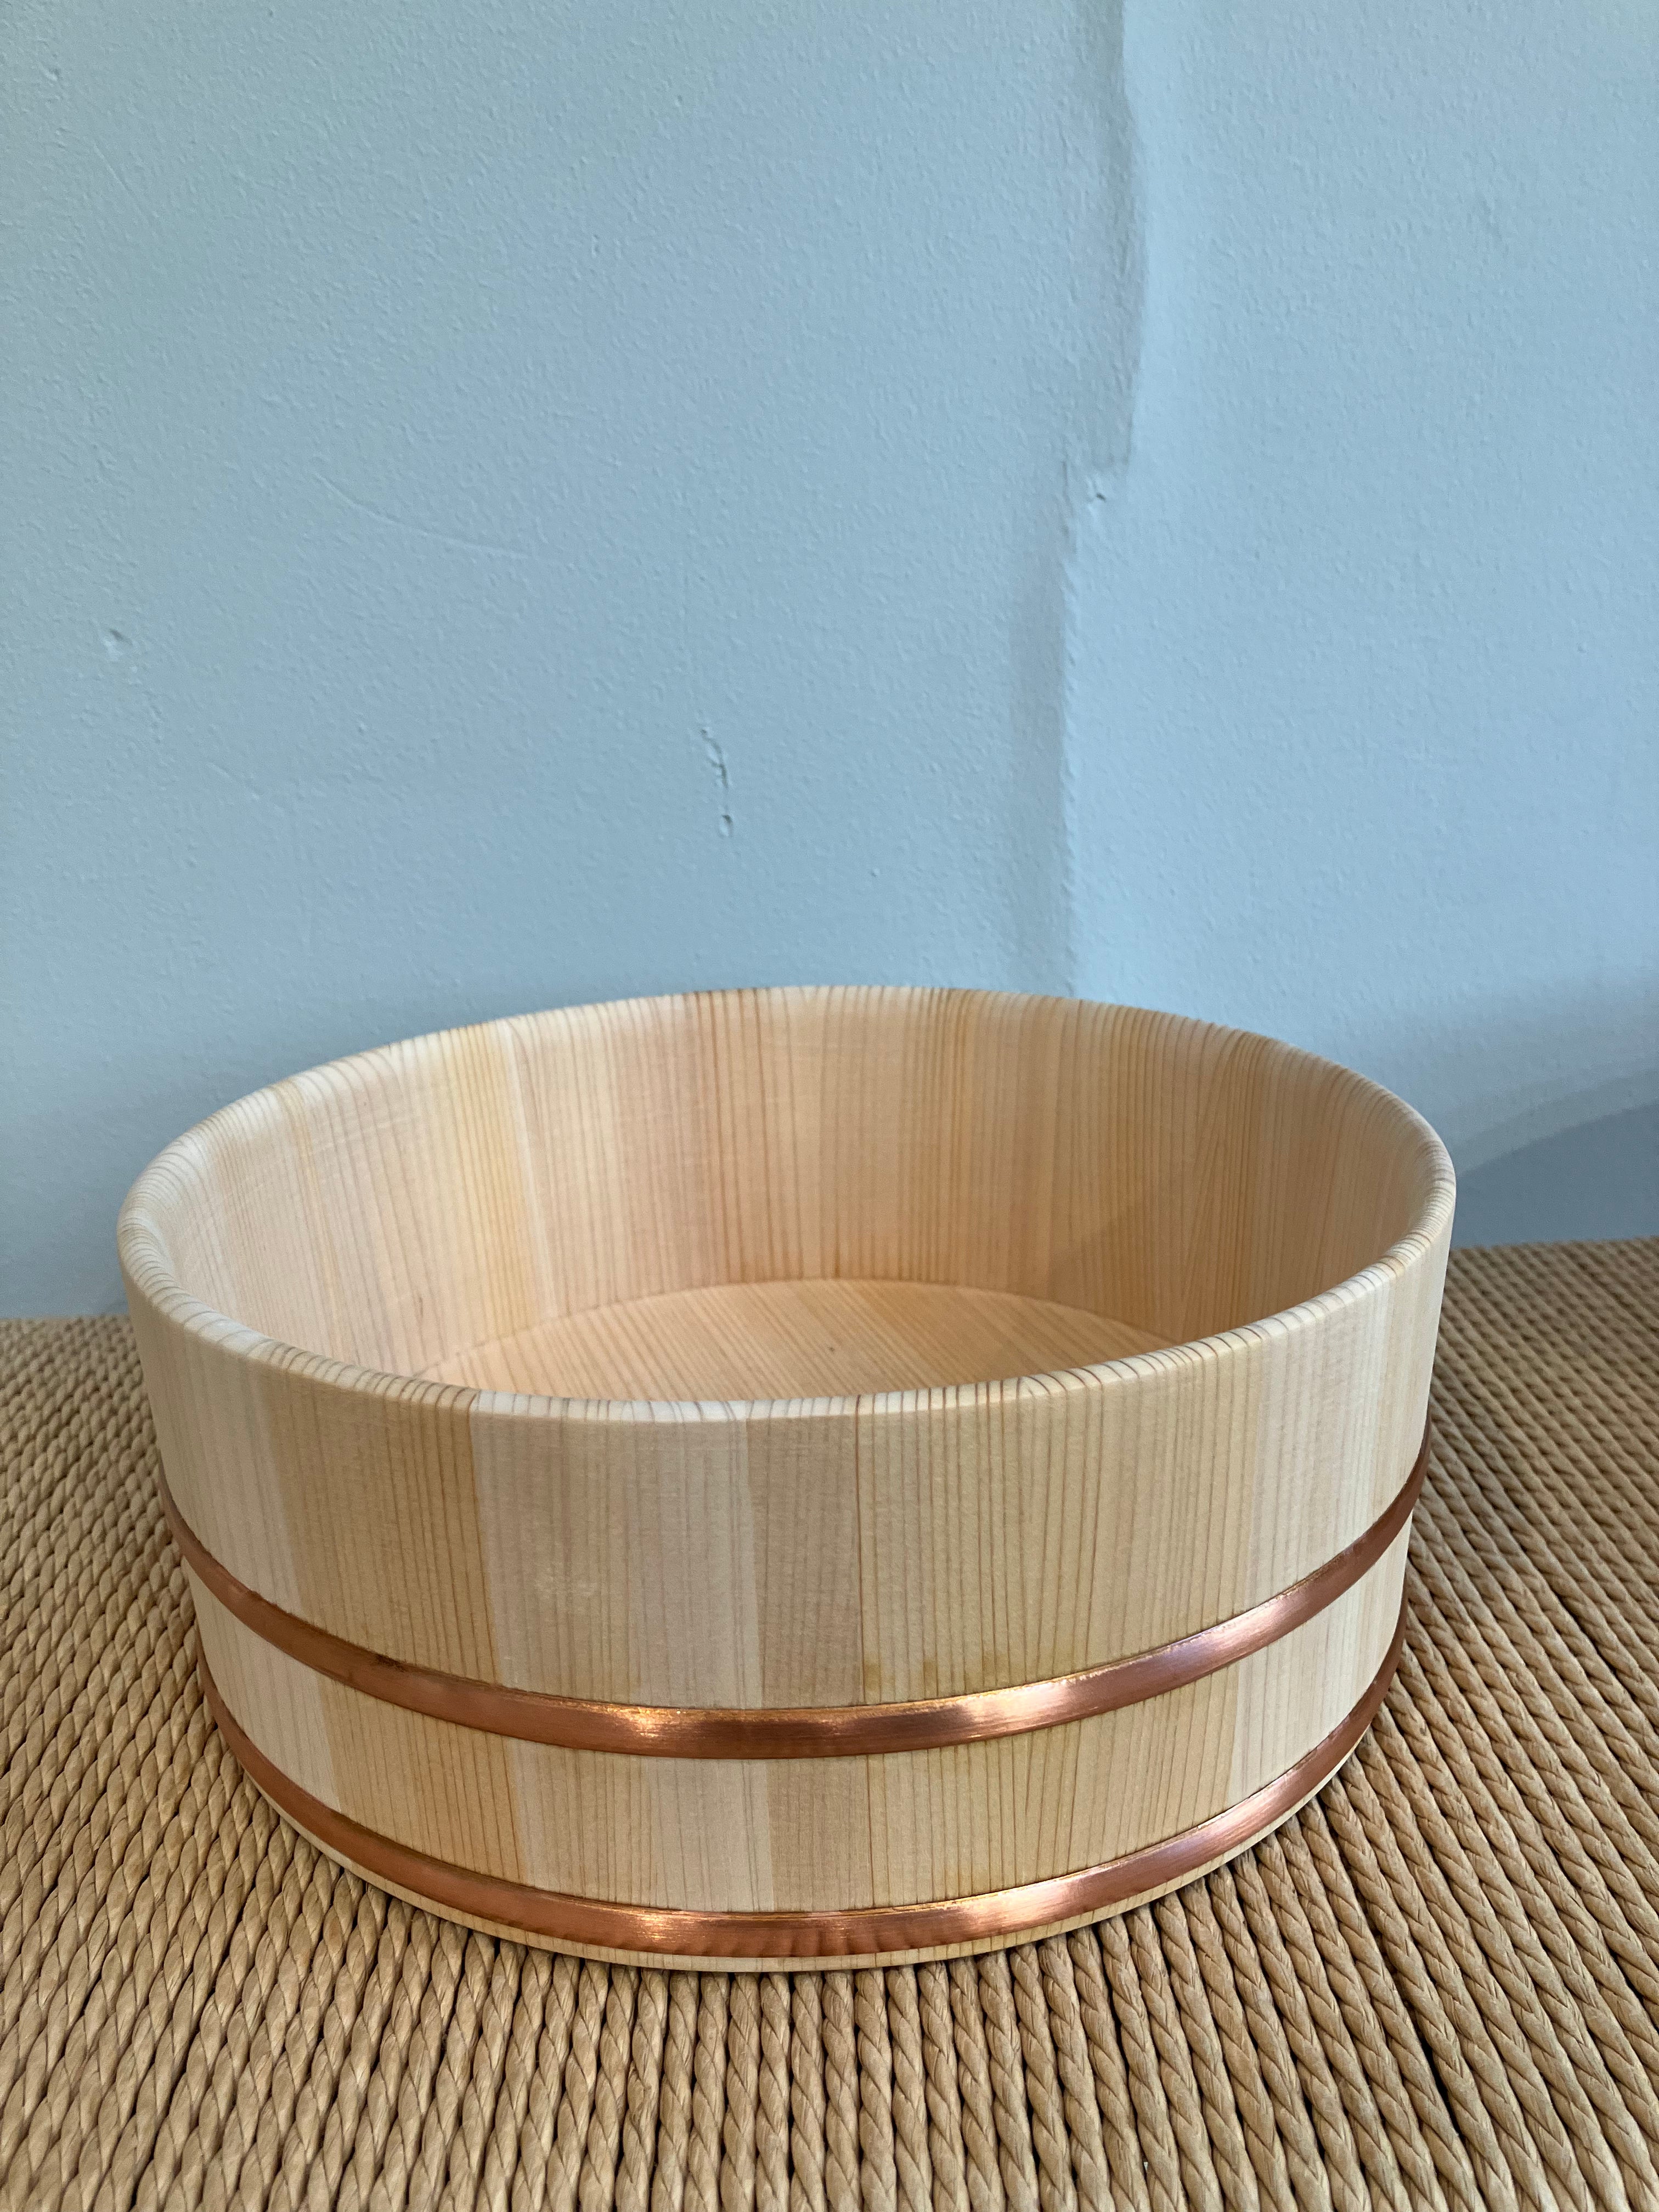 Large wooden tub with steel band